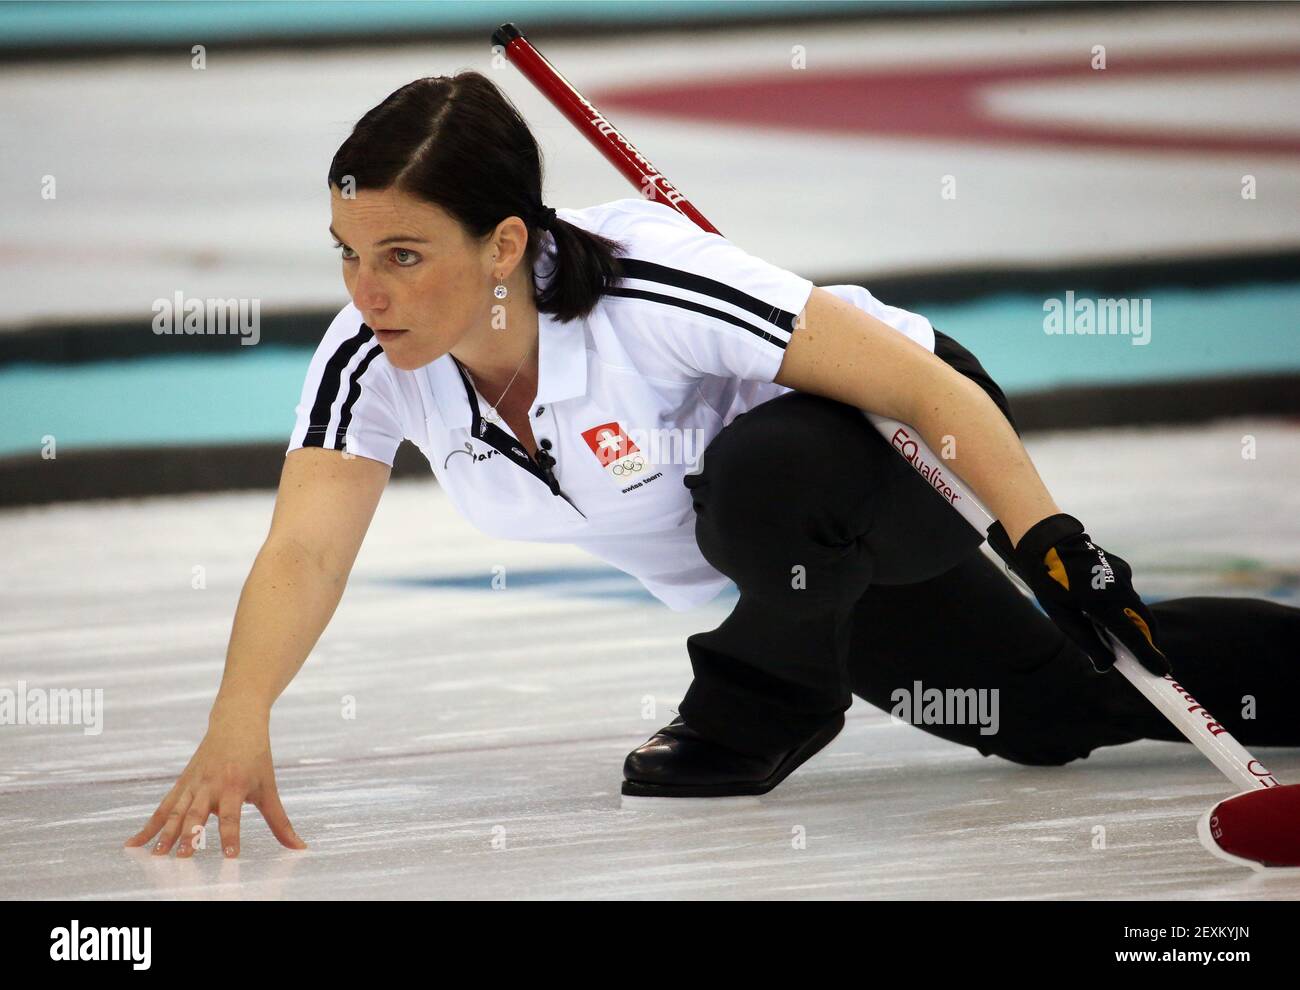 Switzerland's Carmen Kueng watches a throw during women's curling semifinals at the Ice Cube Curling Center during the Winter Olympics in Sochi, Russia, Wednesday, Feb. 19, 2014. (Photo by Brian Cassella/Chicago Tribune/MCT/Sipa USA) Stock Photo